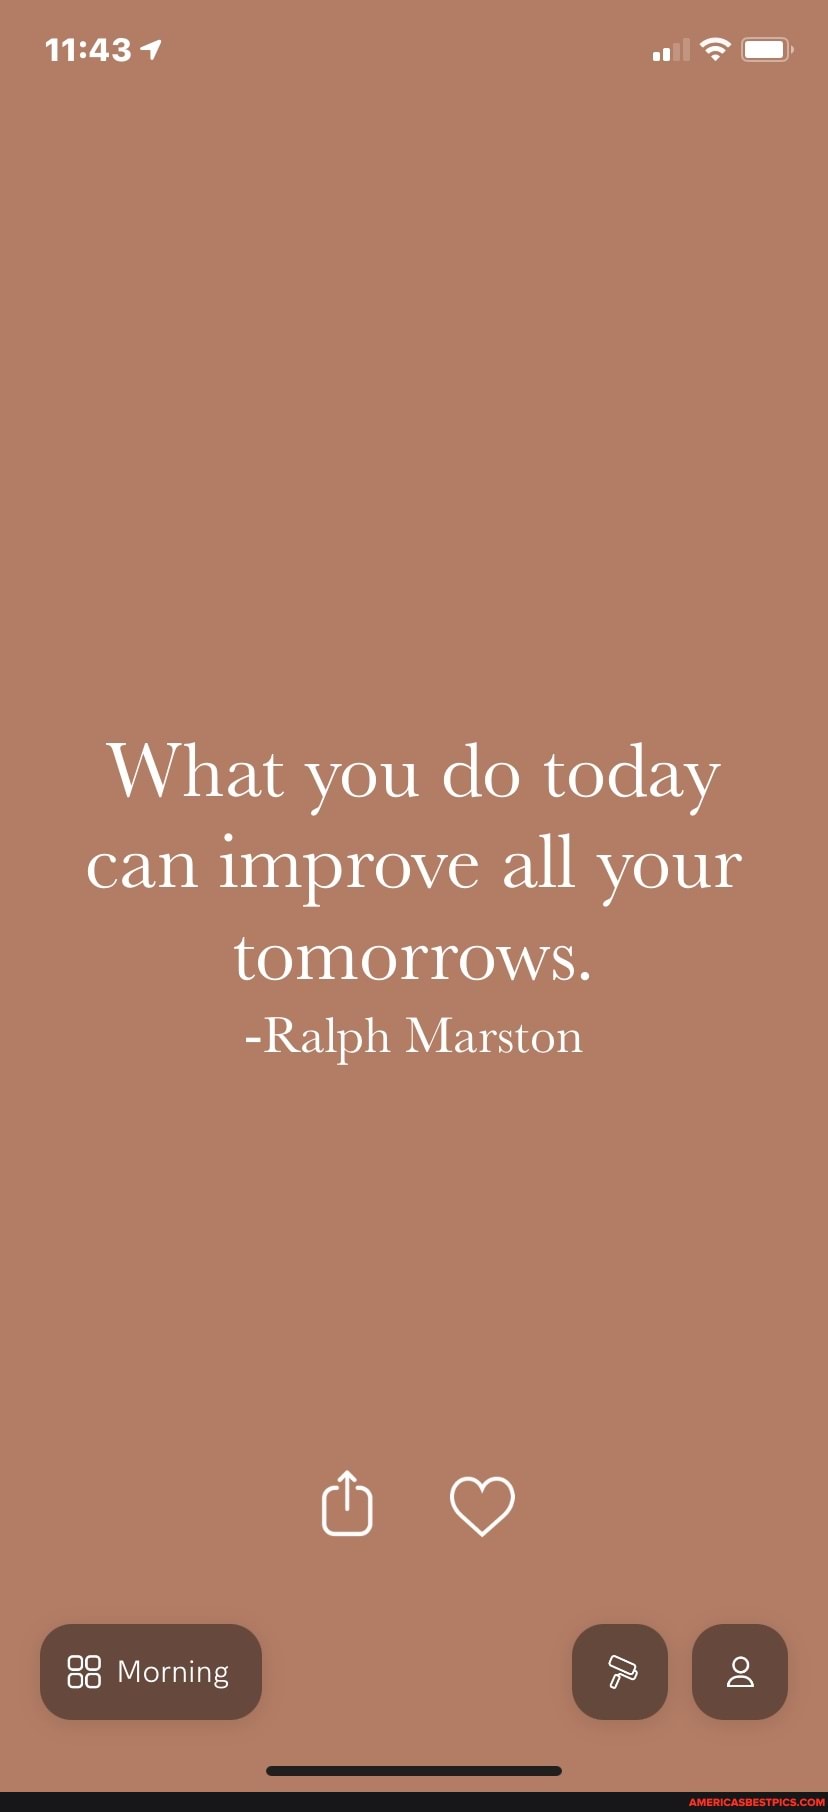 What You Do Today Can Improve All Your Tomorrows Ralph Marston Do Morning America S Best Pics And Videos